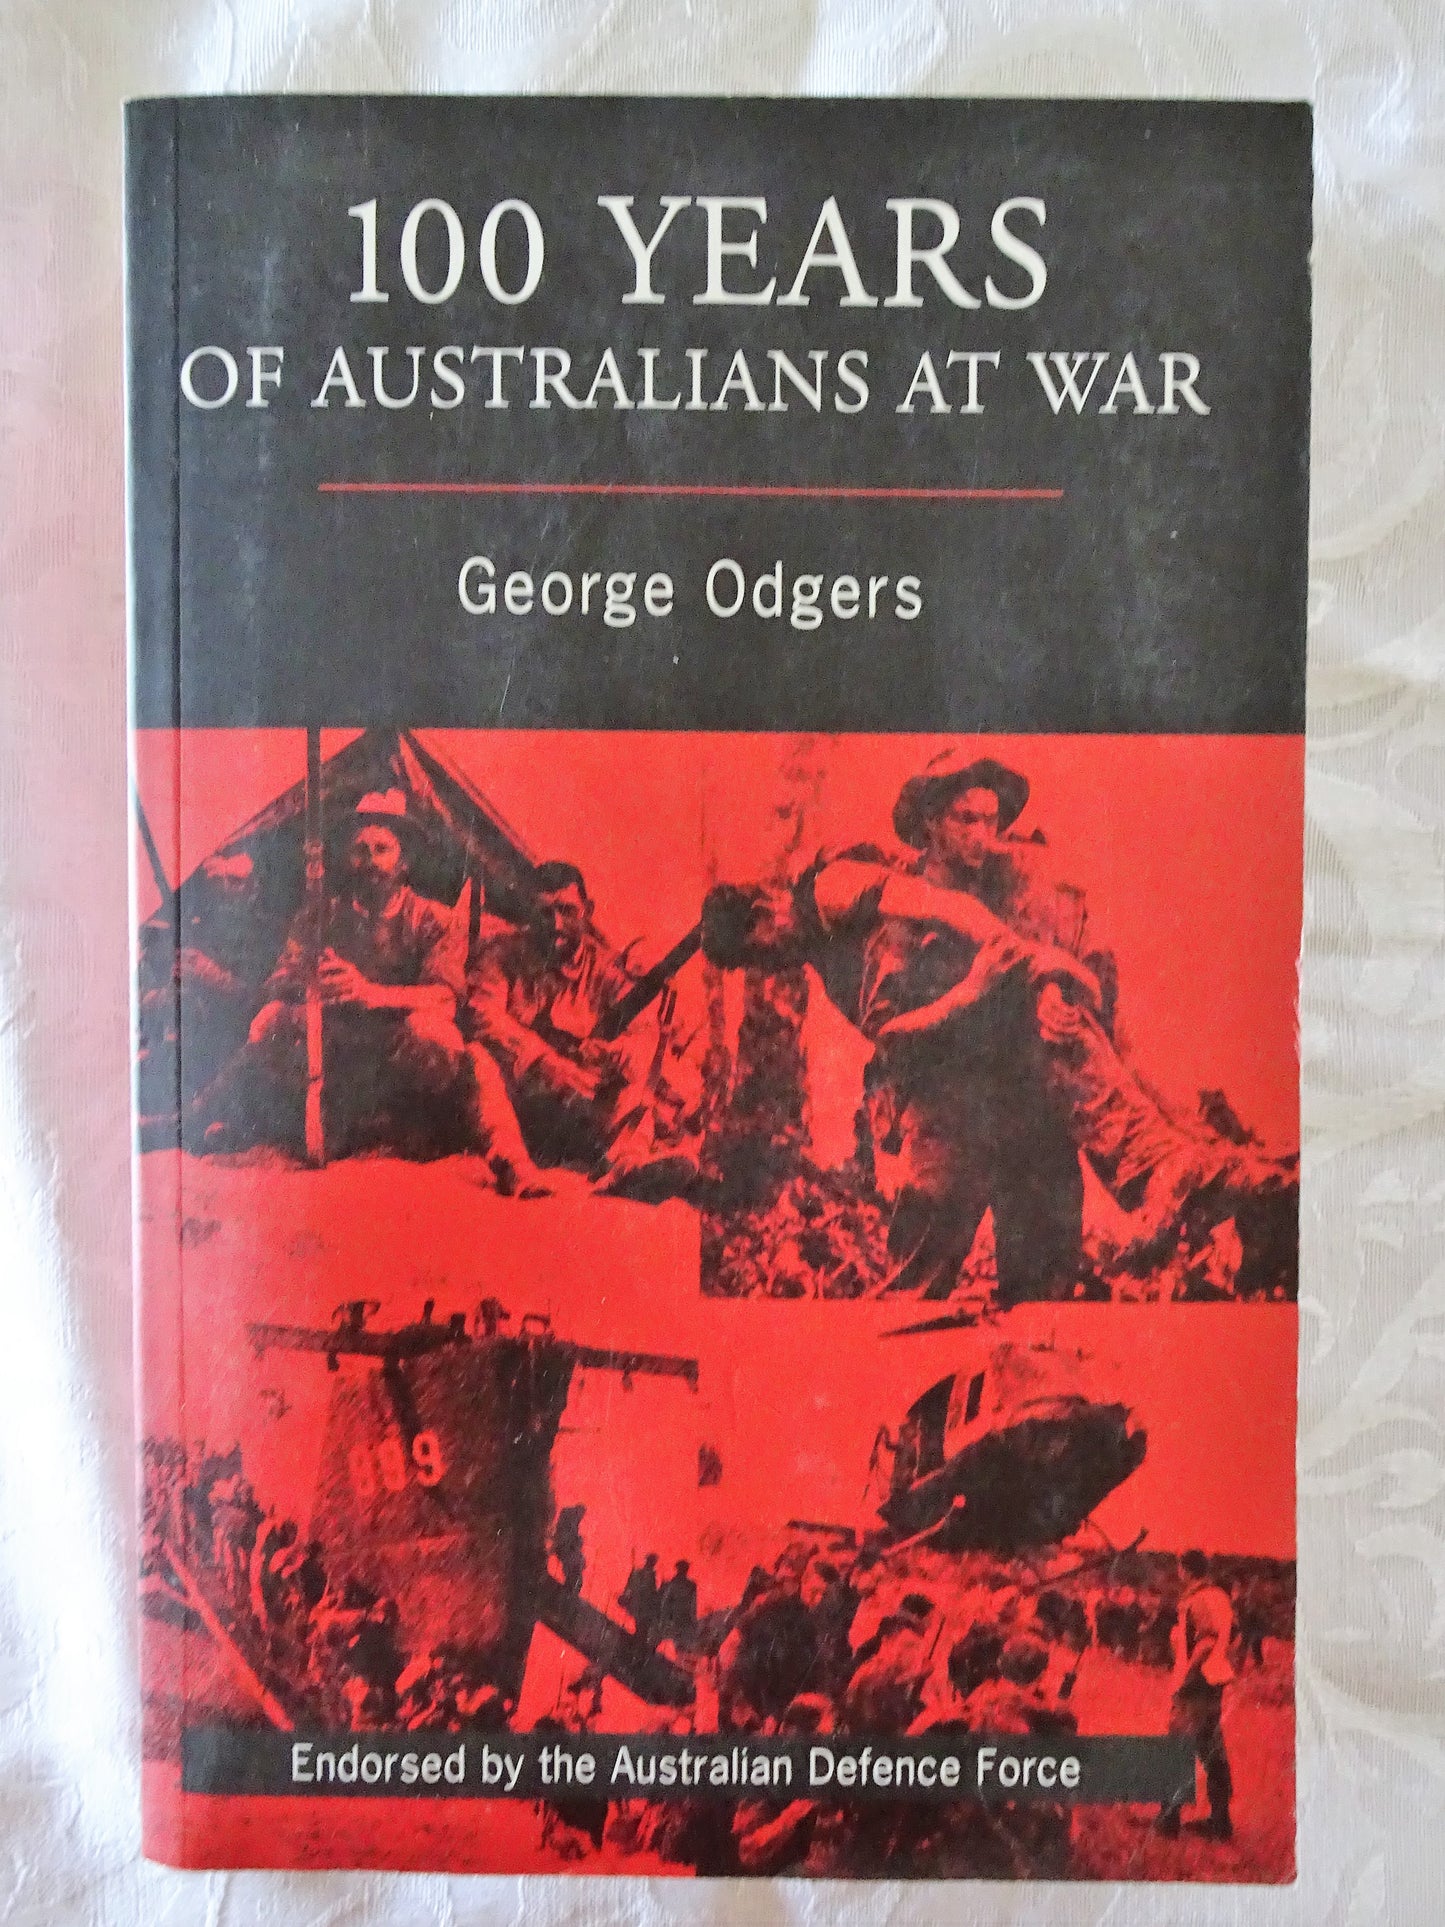 100 Years of Australians At War by George Odgers